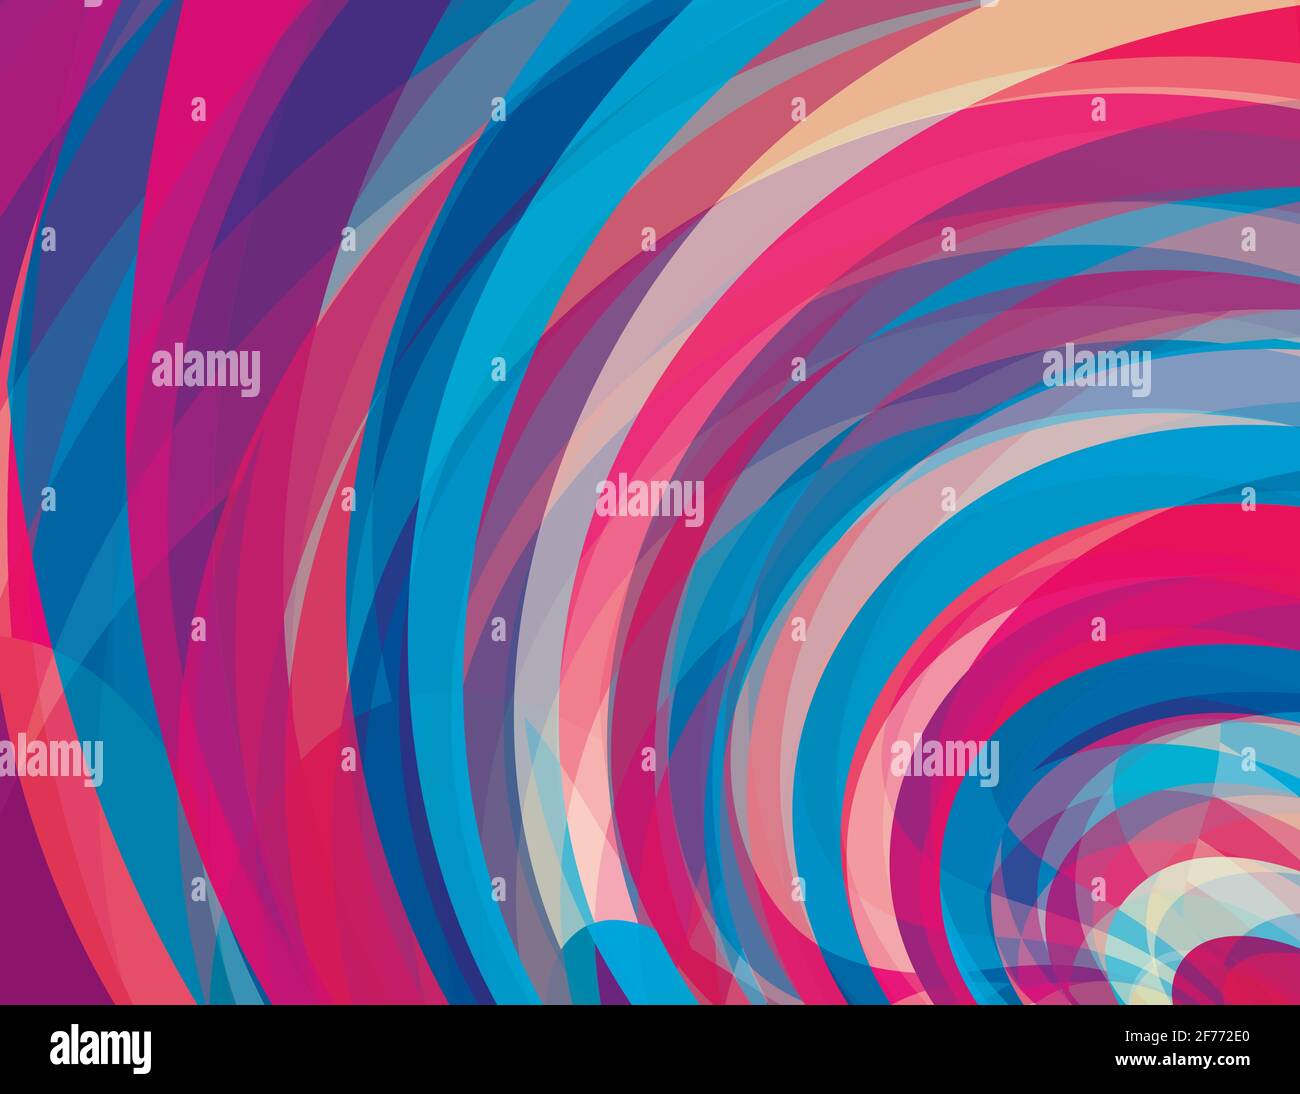 Artistic design background with amaranth and cerulean blue swirls. Vector graphic pattern. CMYK colors Stock Vector